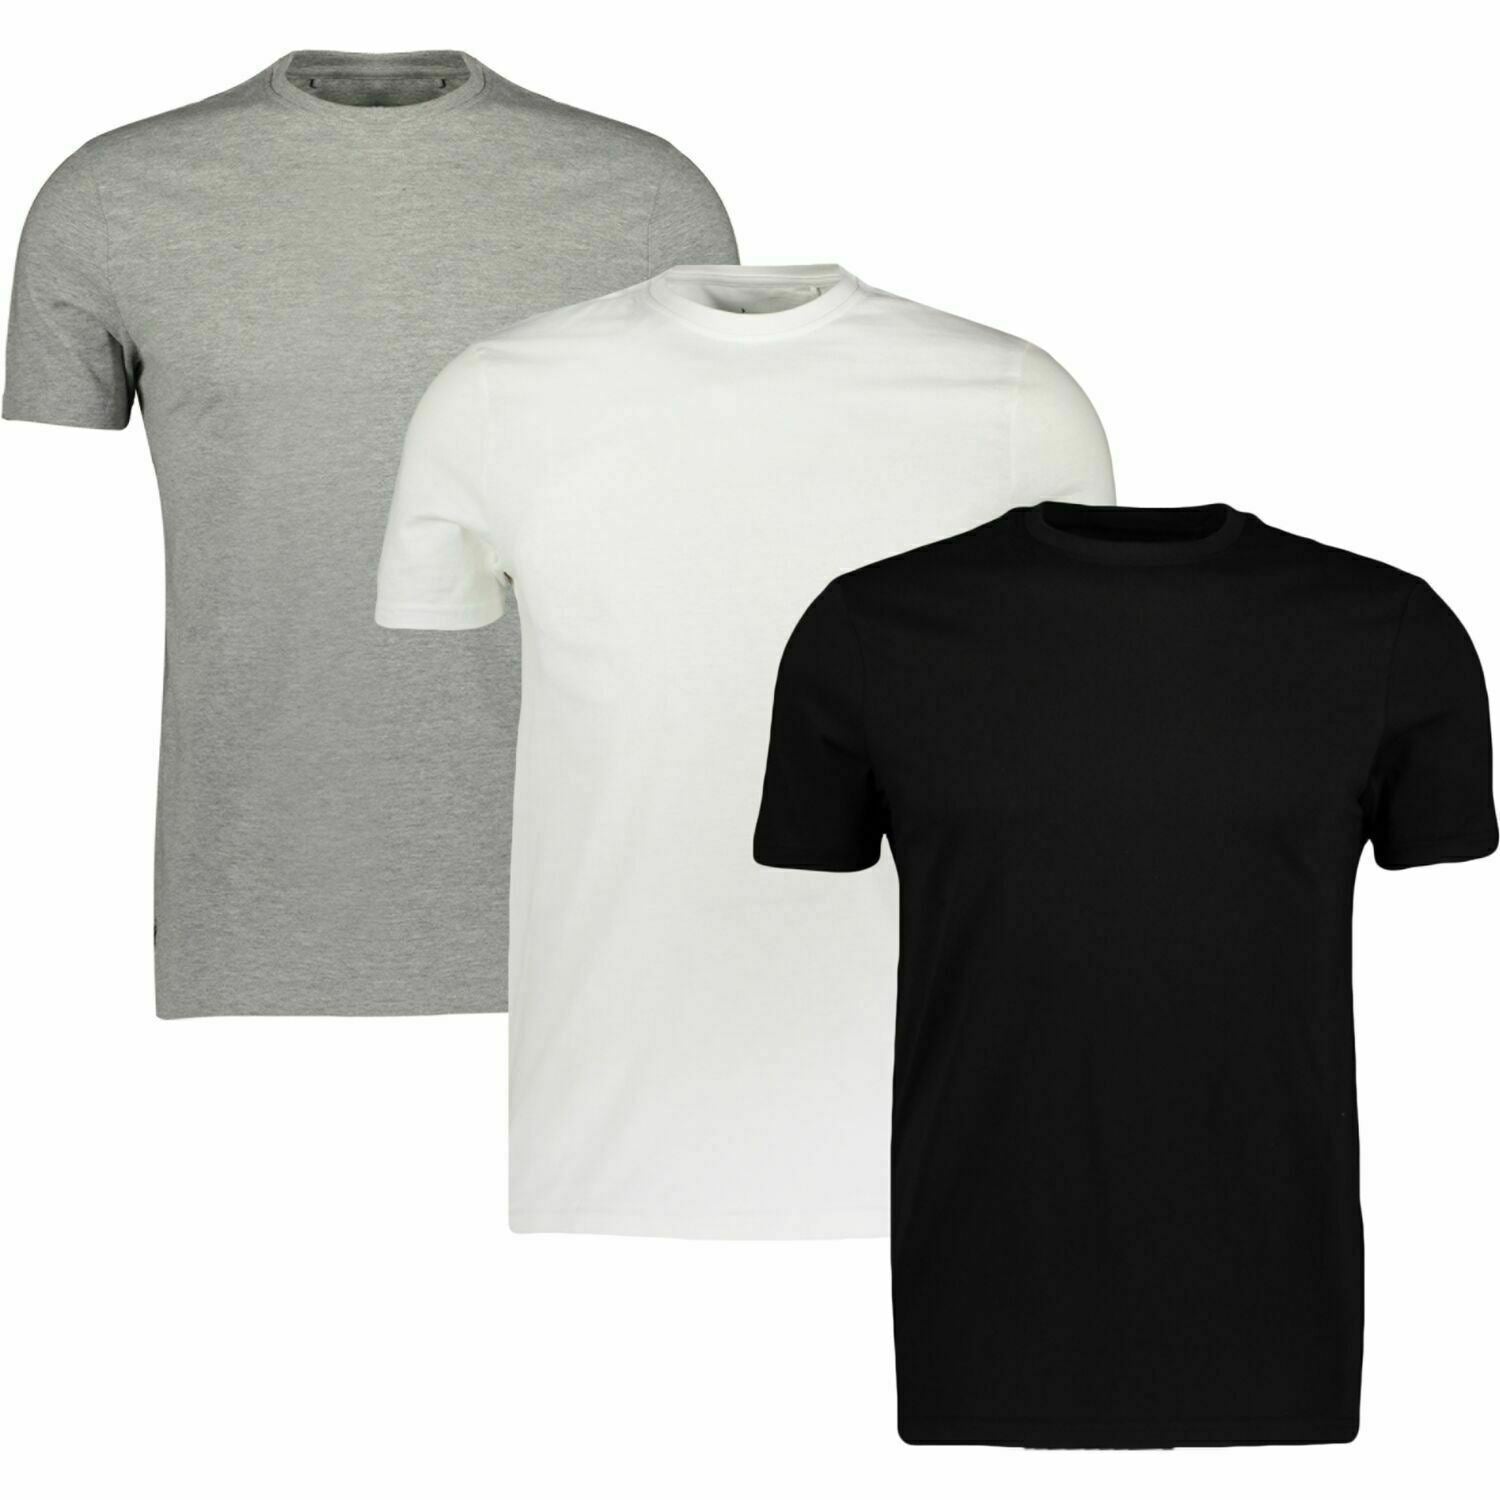 US POLO ASSN Men's 3-Pack Short Sleeve T-Shirts, Black/White/Grey, size M